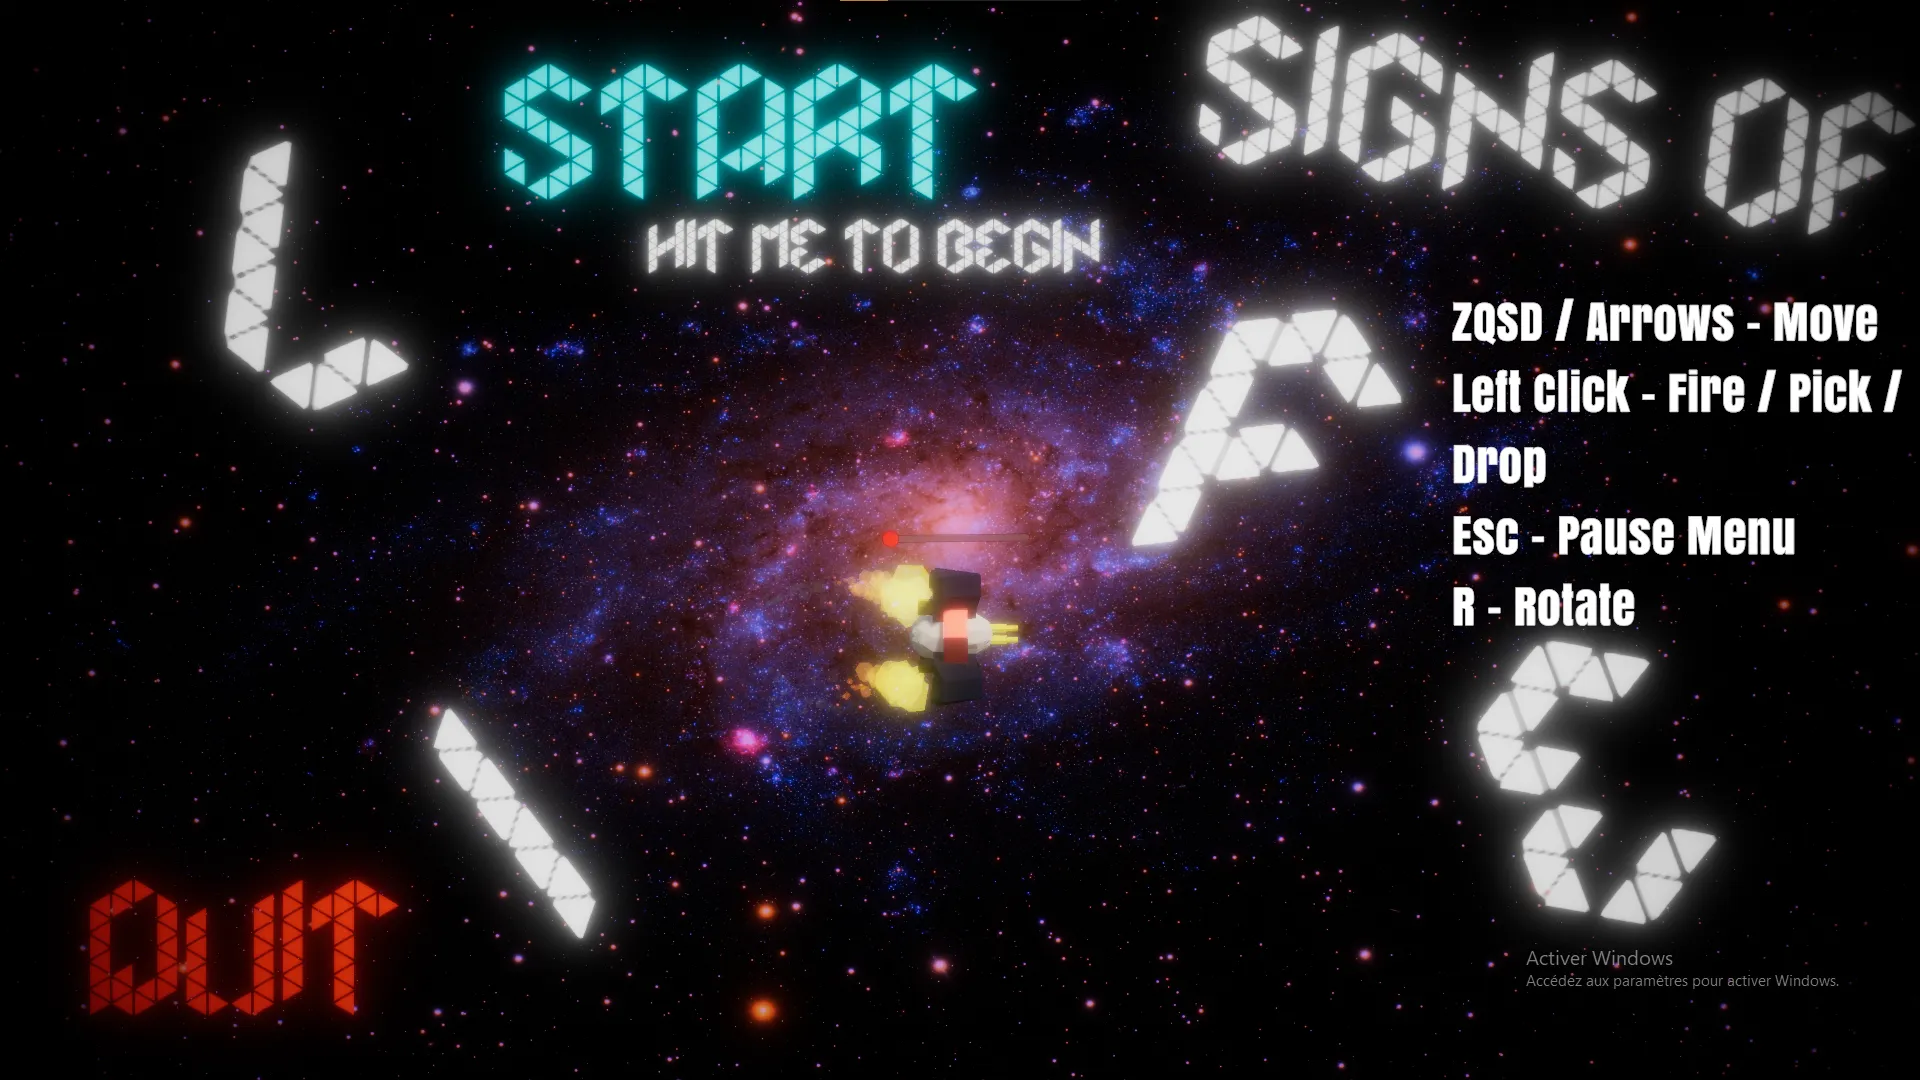 The main page of a small game I created for a game jam